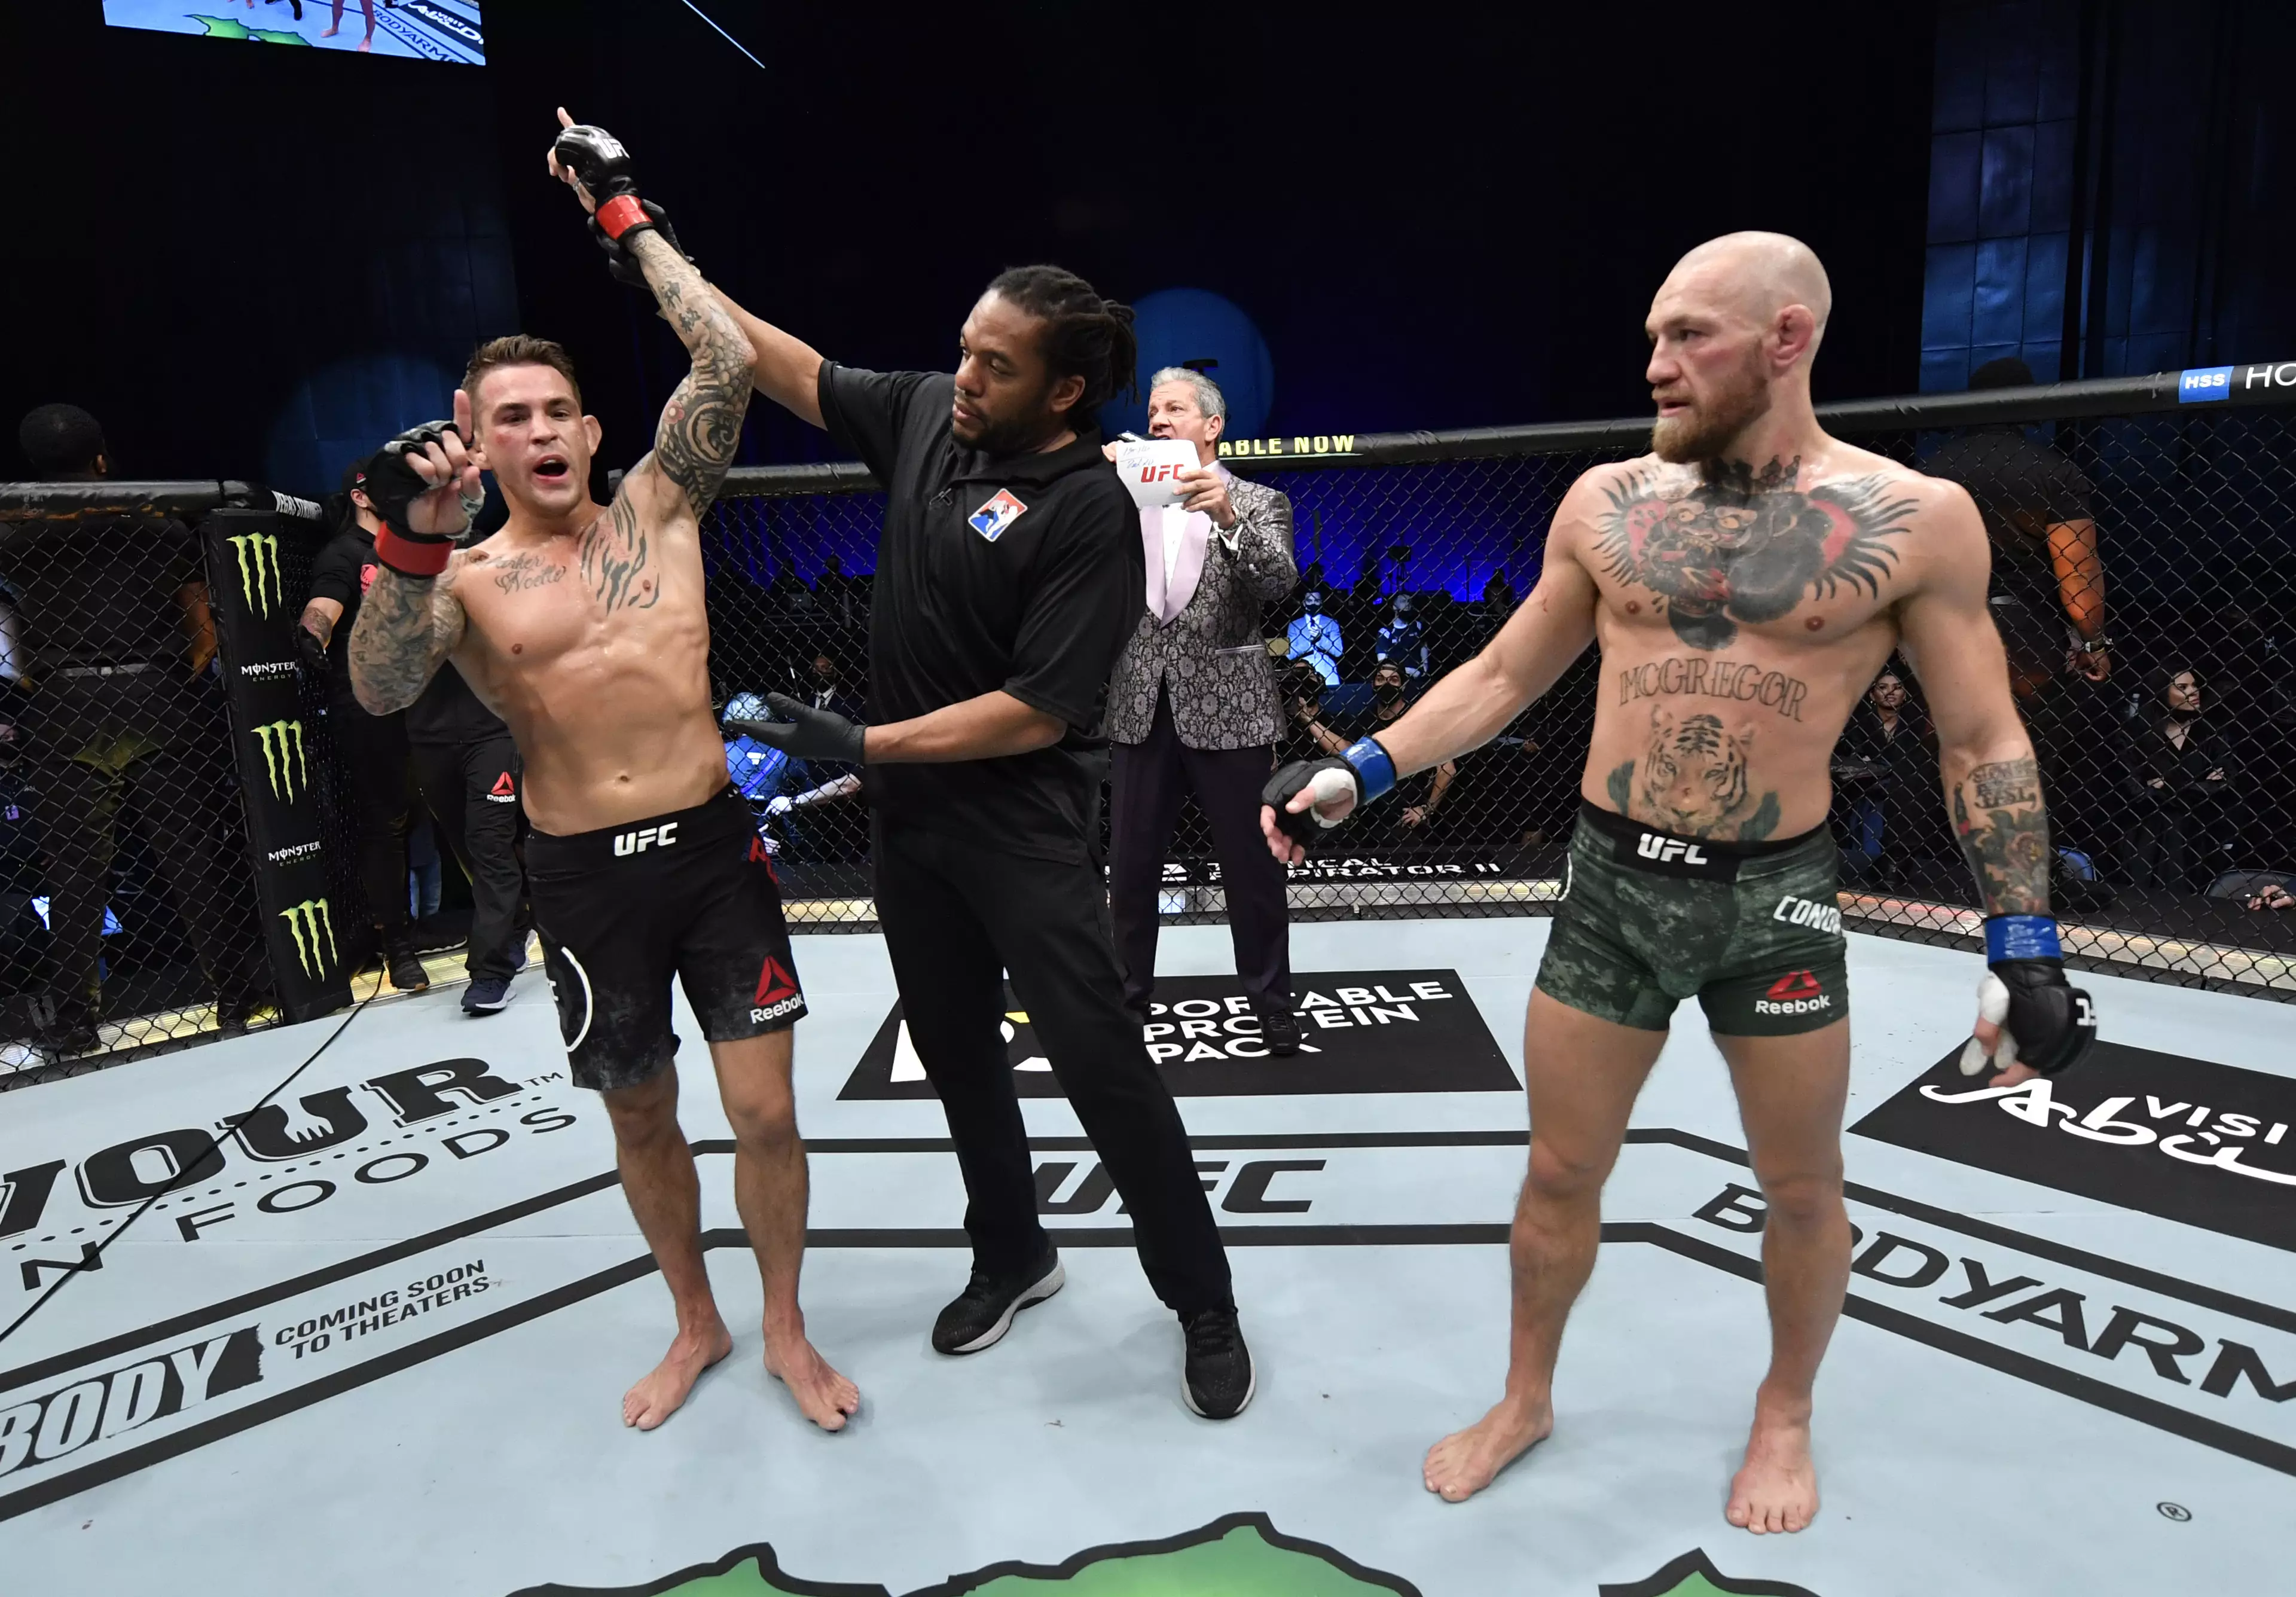 Poirier has his hand raised at the end of the fight. Image: PA Images